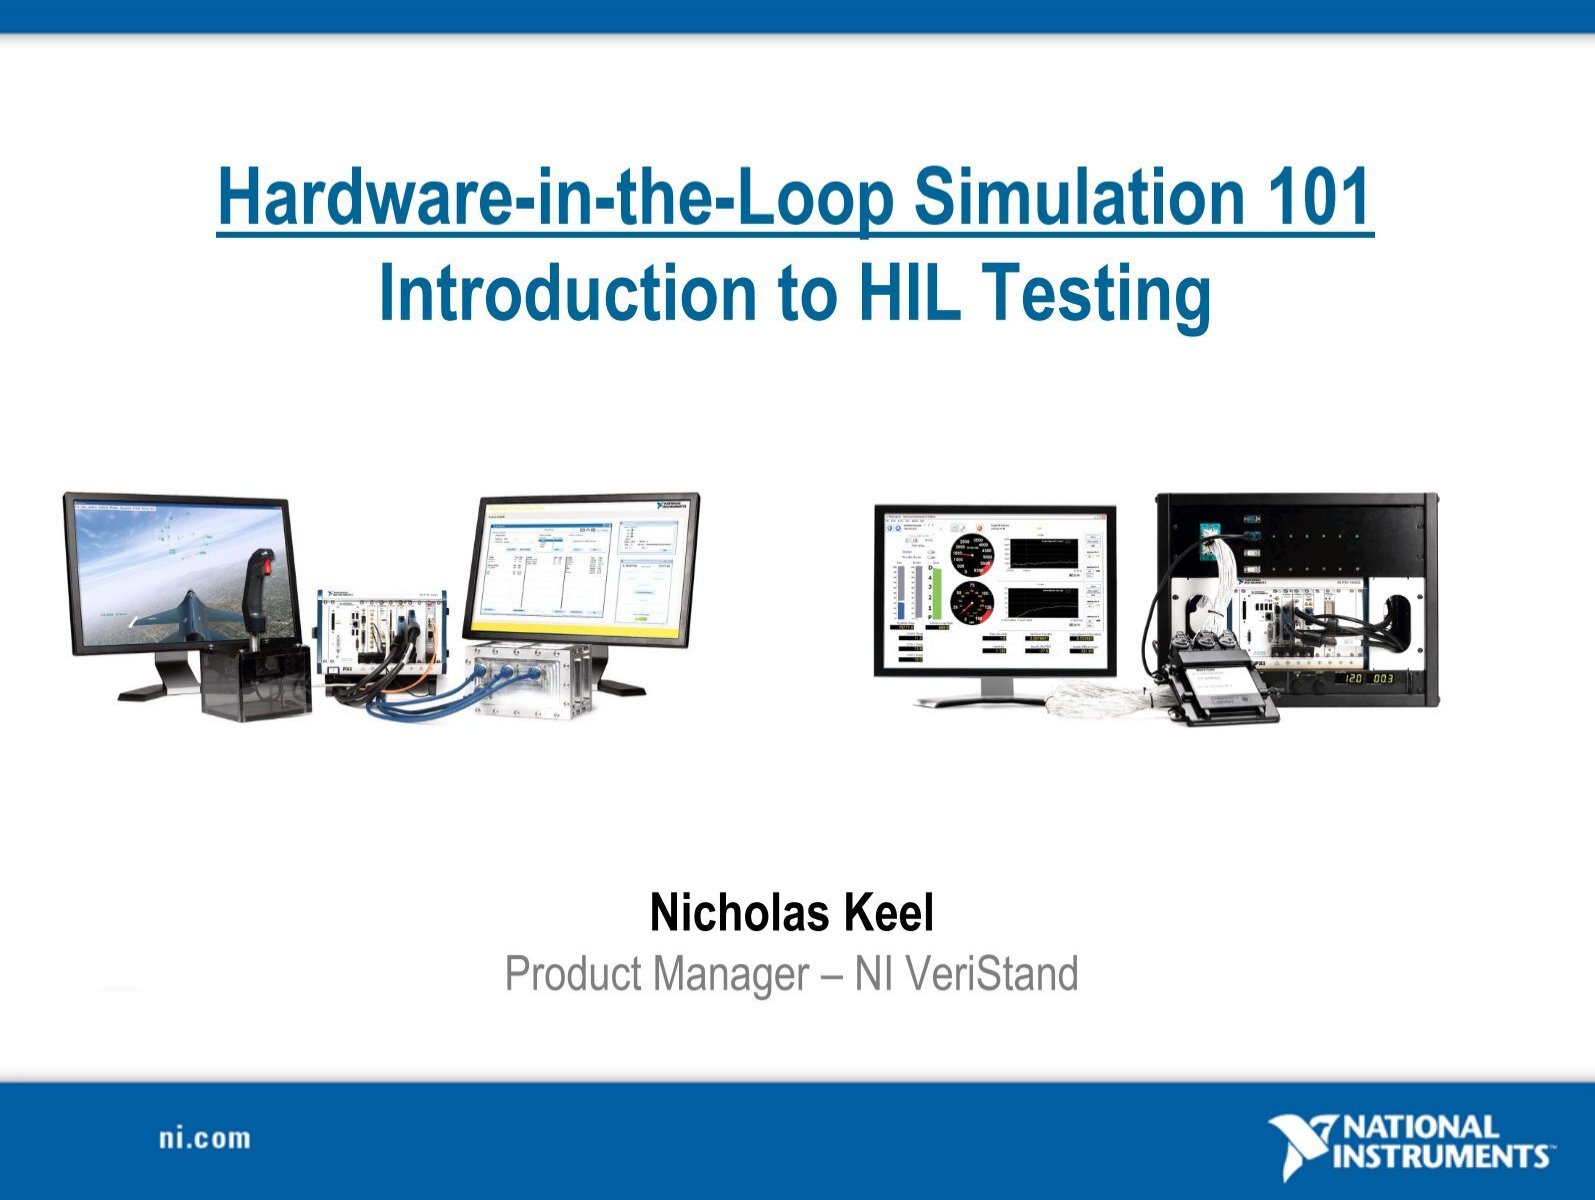 Automotive Hardware-in-the-Loop (HIL) Test - National Instruments - NI